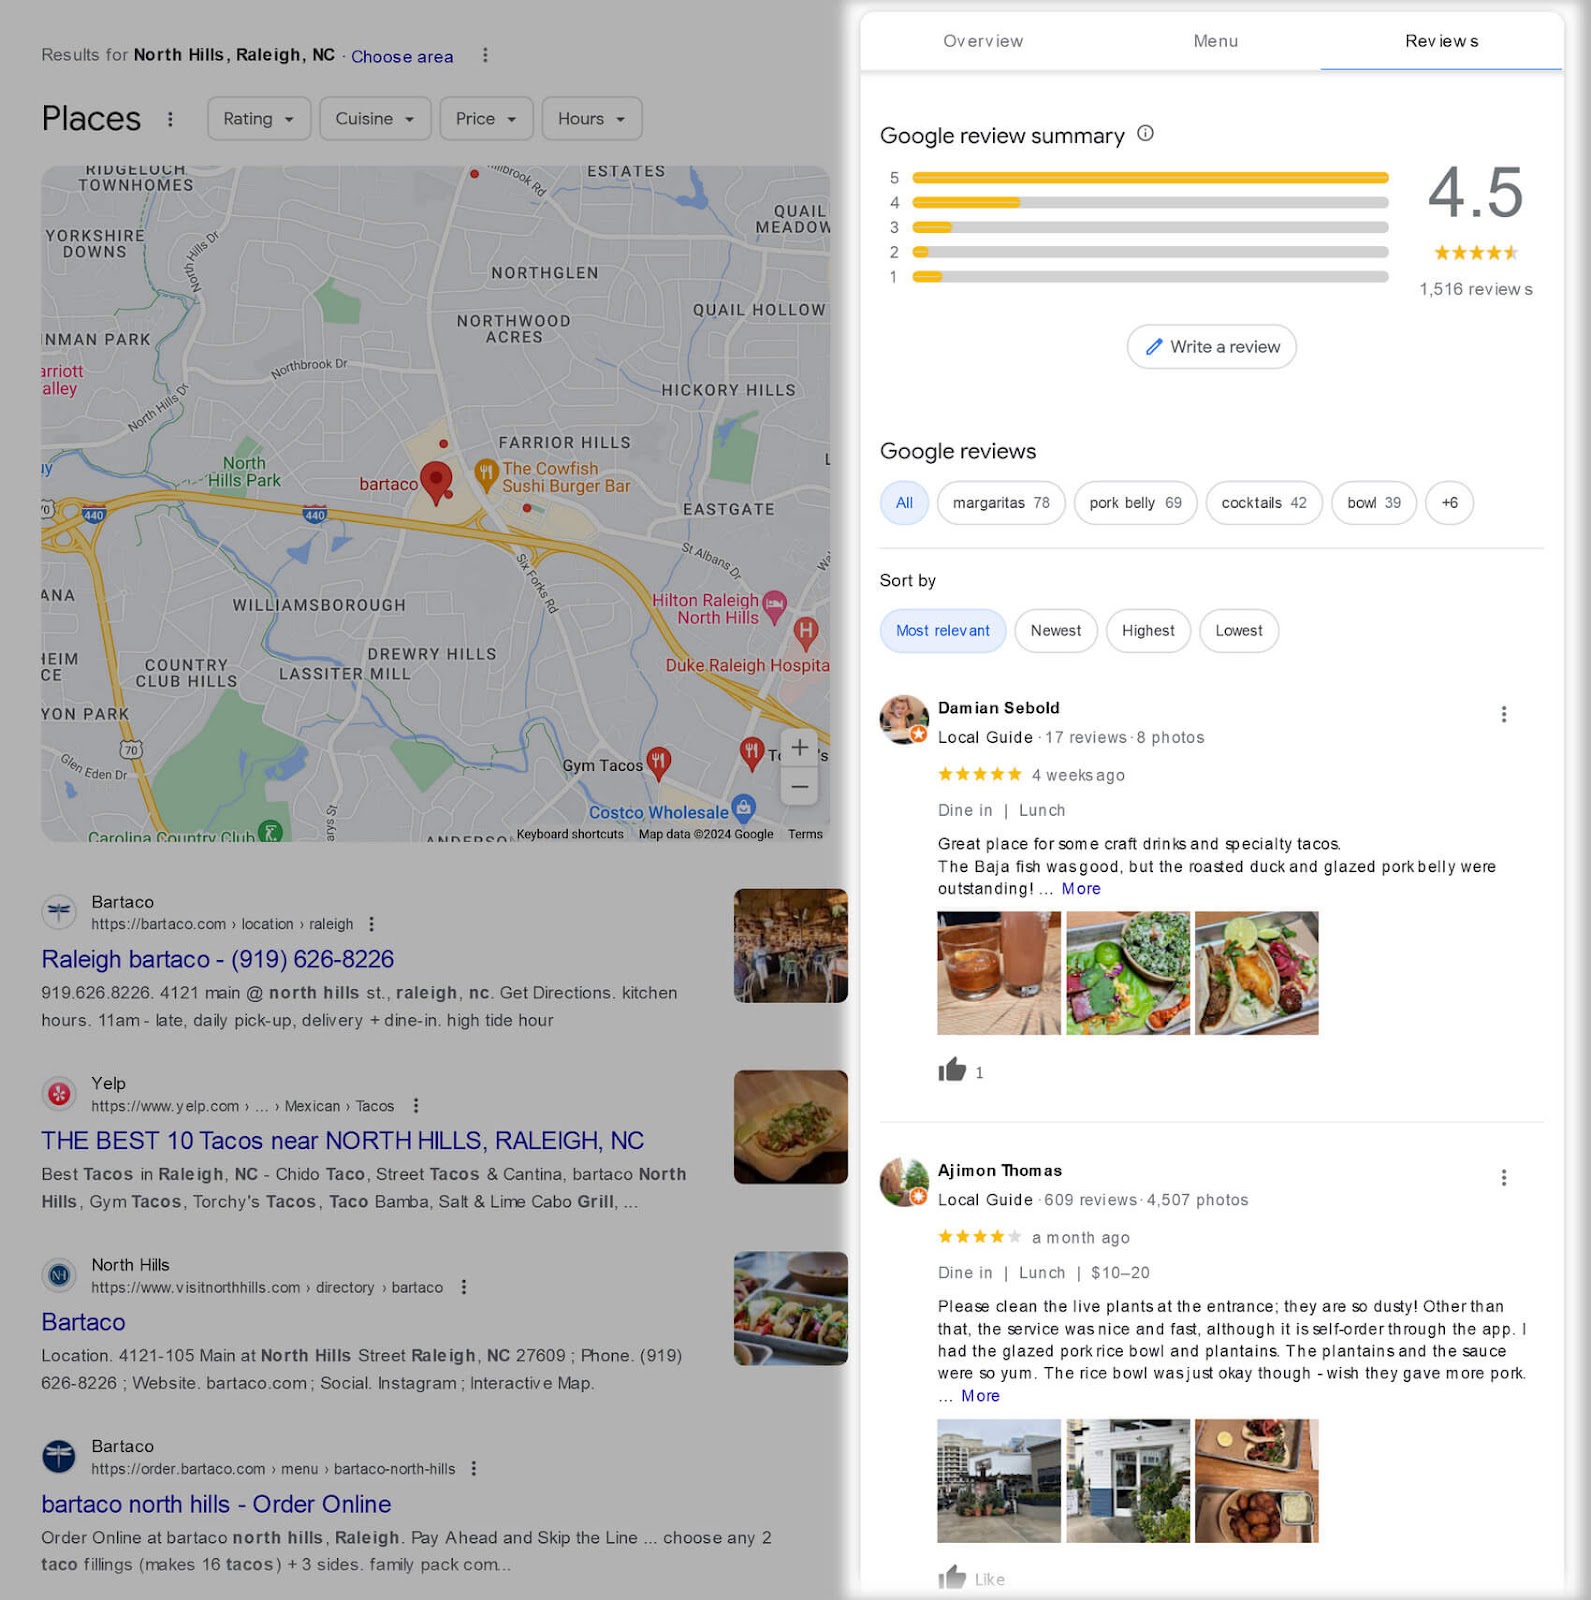 "Reviews" section of Google local pack